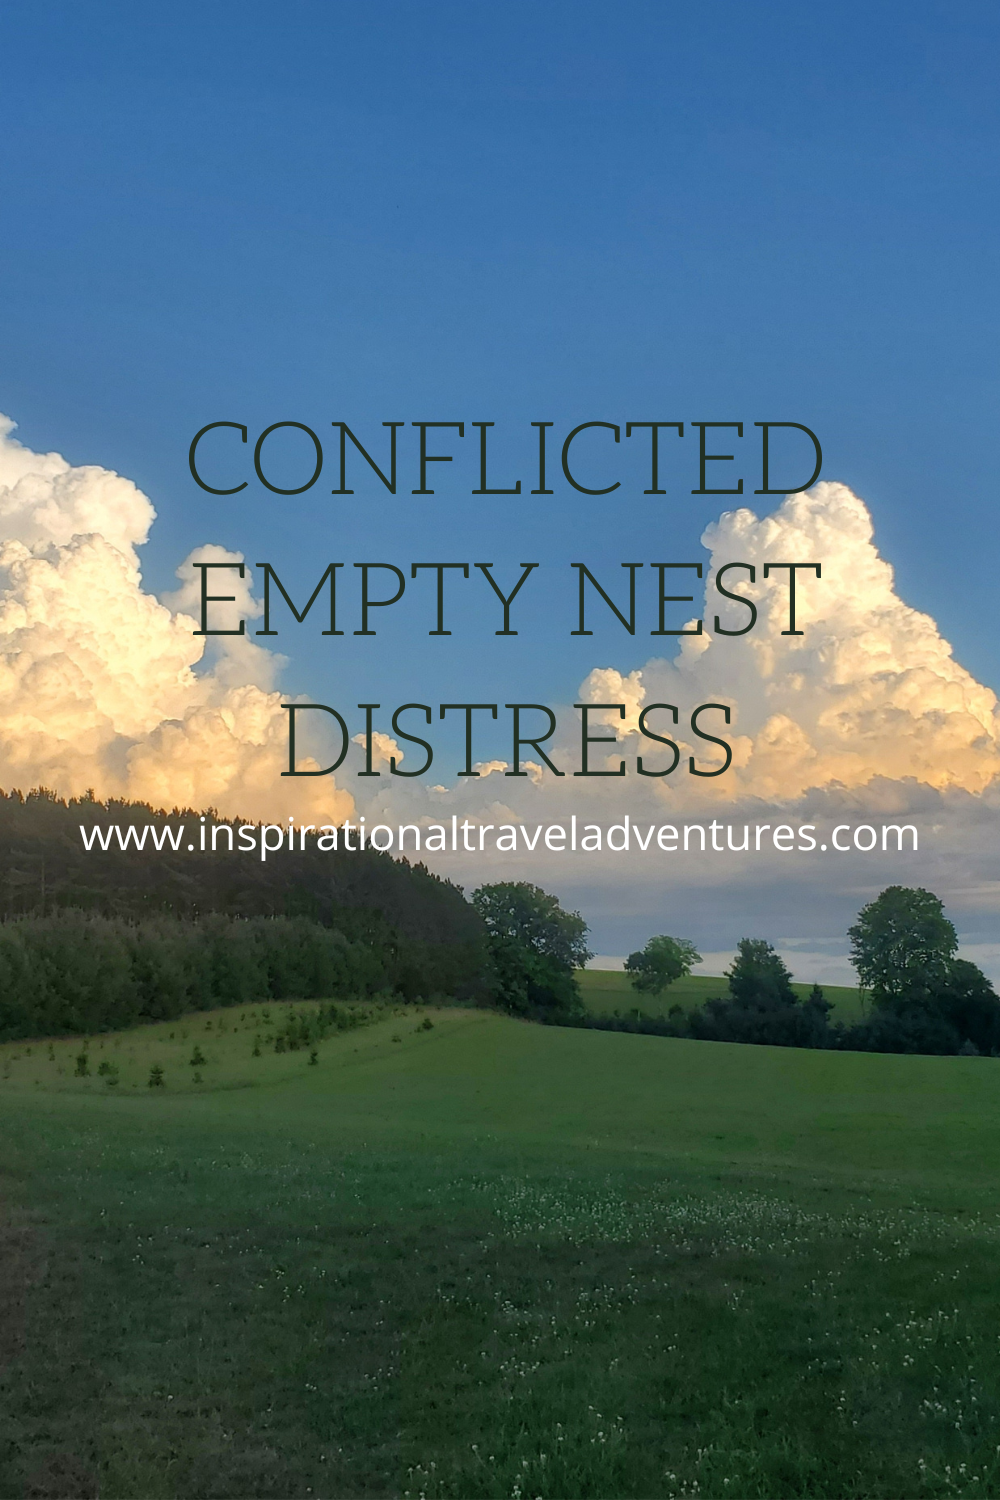 CONFLICTED EMPTY NEST DISTRESS